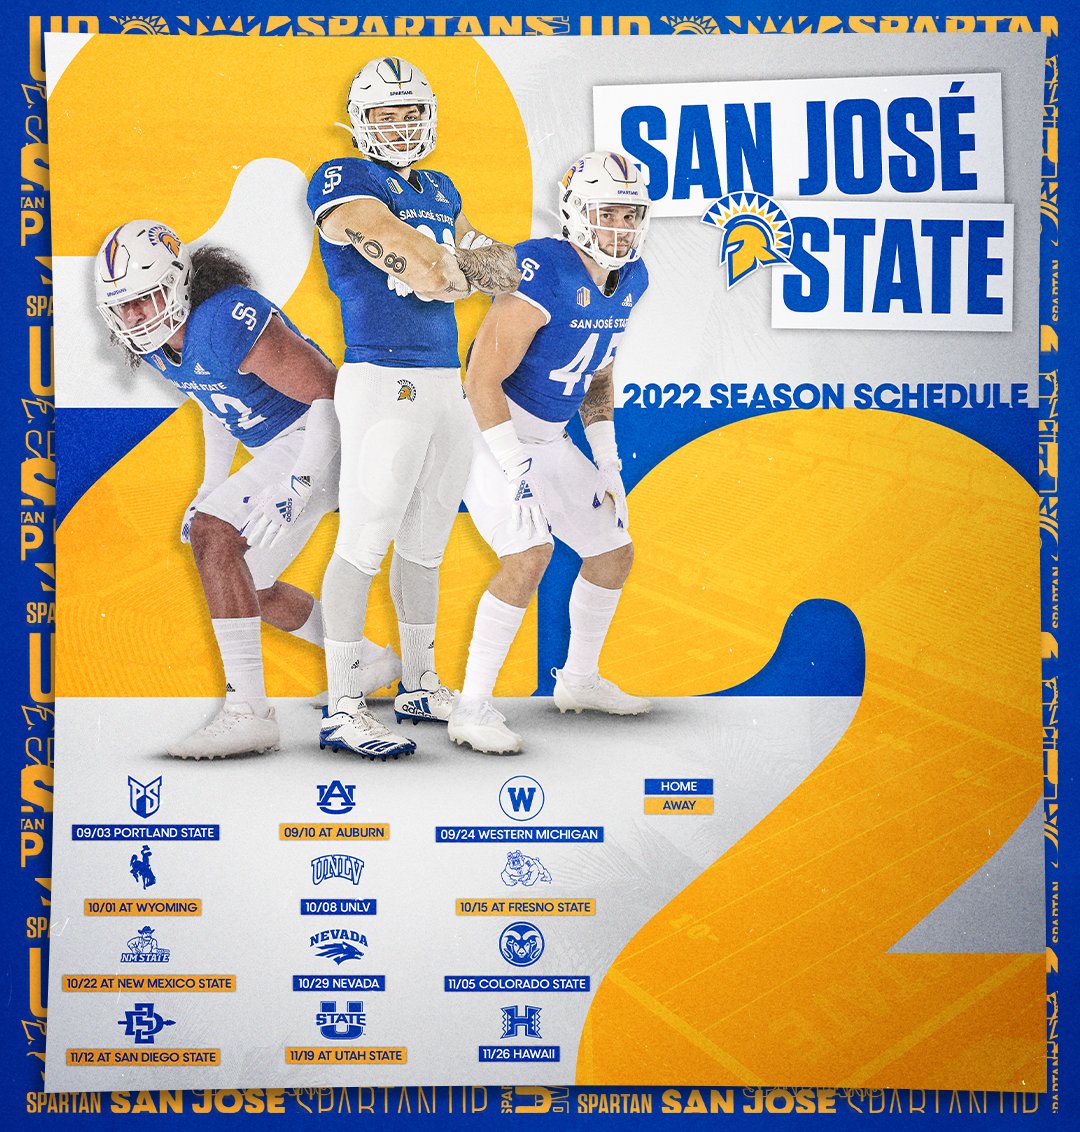 The 2022 San José State Football Schedule 📅 Lock in your season tickets now 🎟️🔒 Call or text 408.924.7589 (SJTX) 🔗 bit.ly/2022SJSUfb #SpartanUp | #ClimbTheMountain